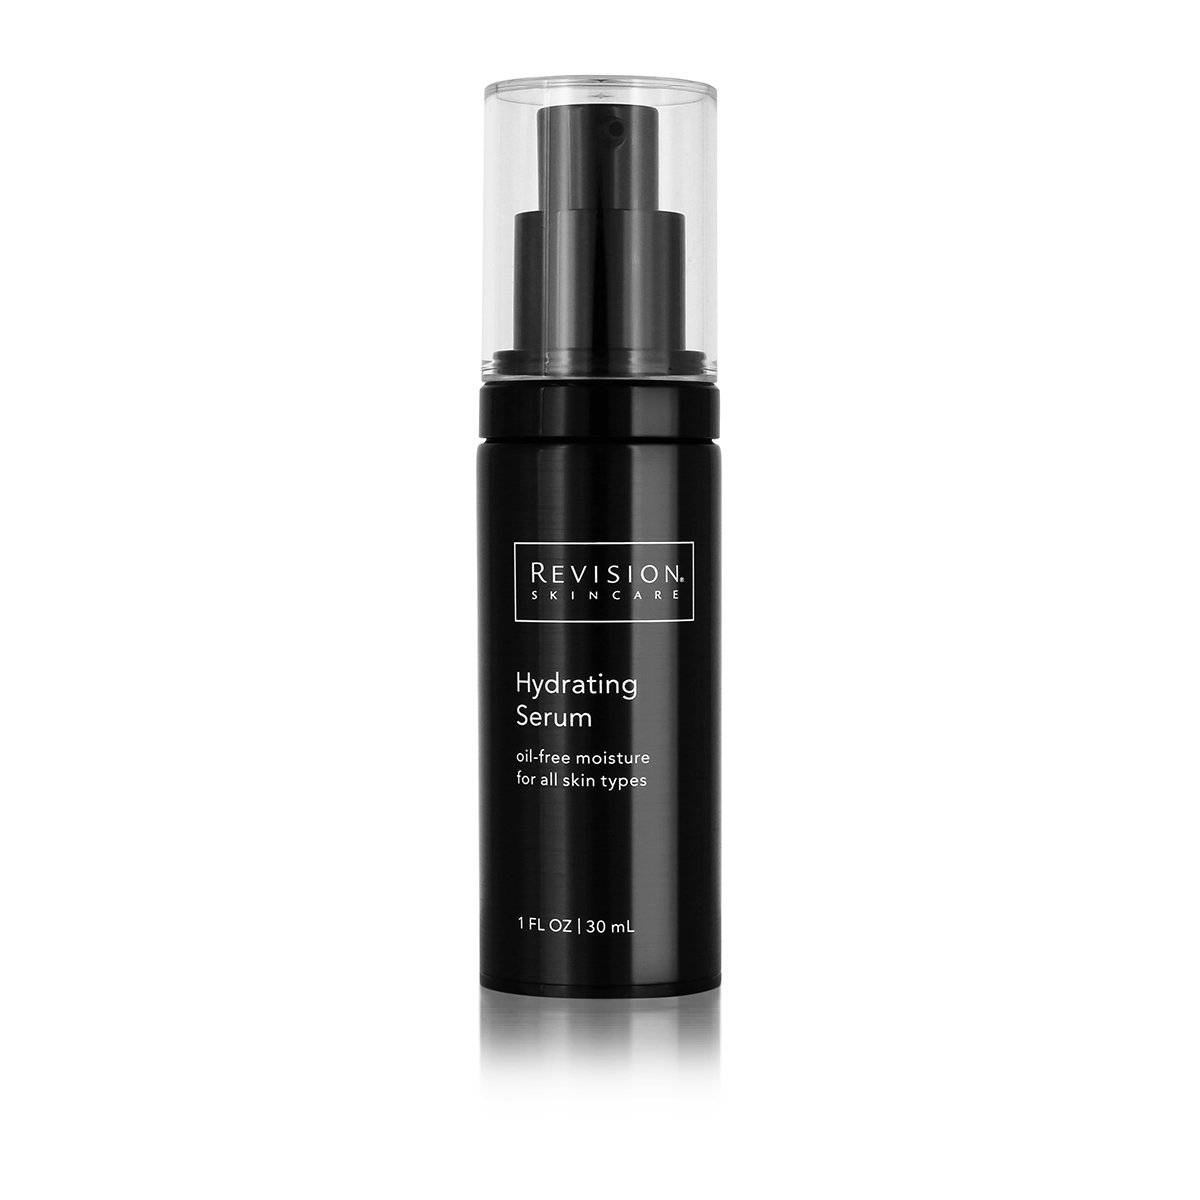 Revision Hydrating Serum - Anti-Aging Skin care